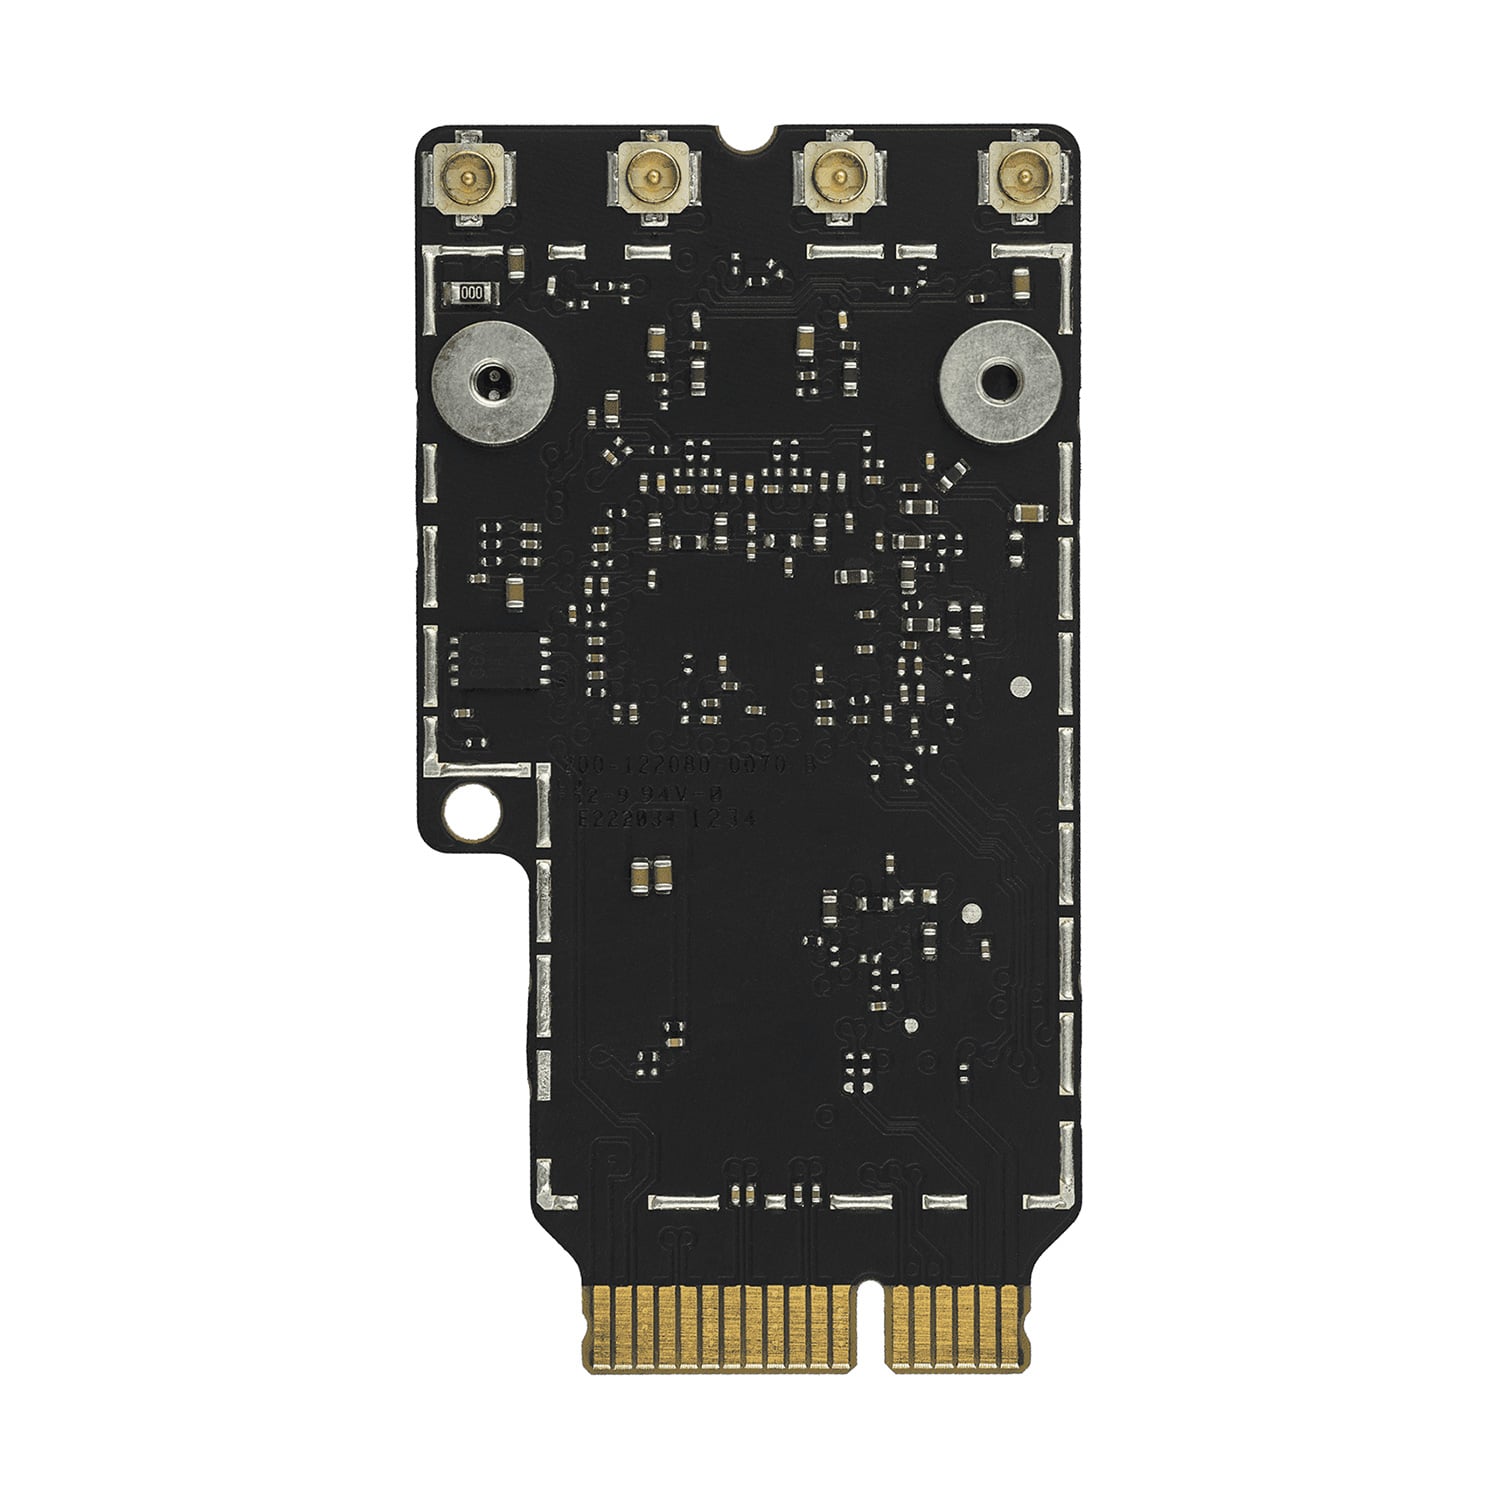 AIRPORT WIRELESS NETWORK CARD  #BCM94331CD FOR IMAC A1418/A1419 (LATE 2012, EARLY 2013)